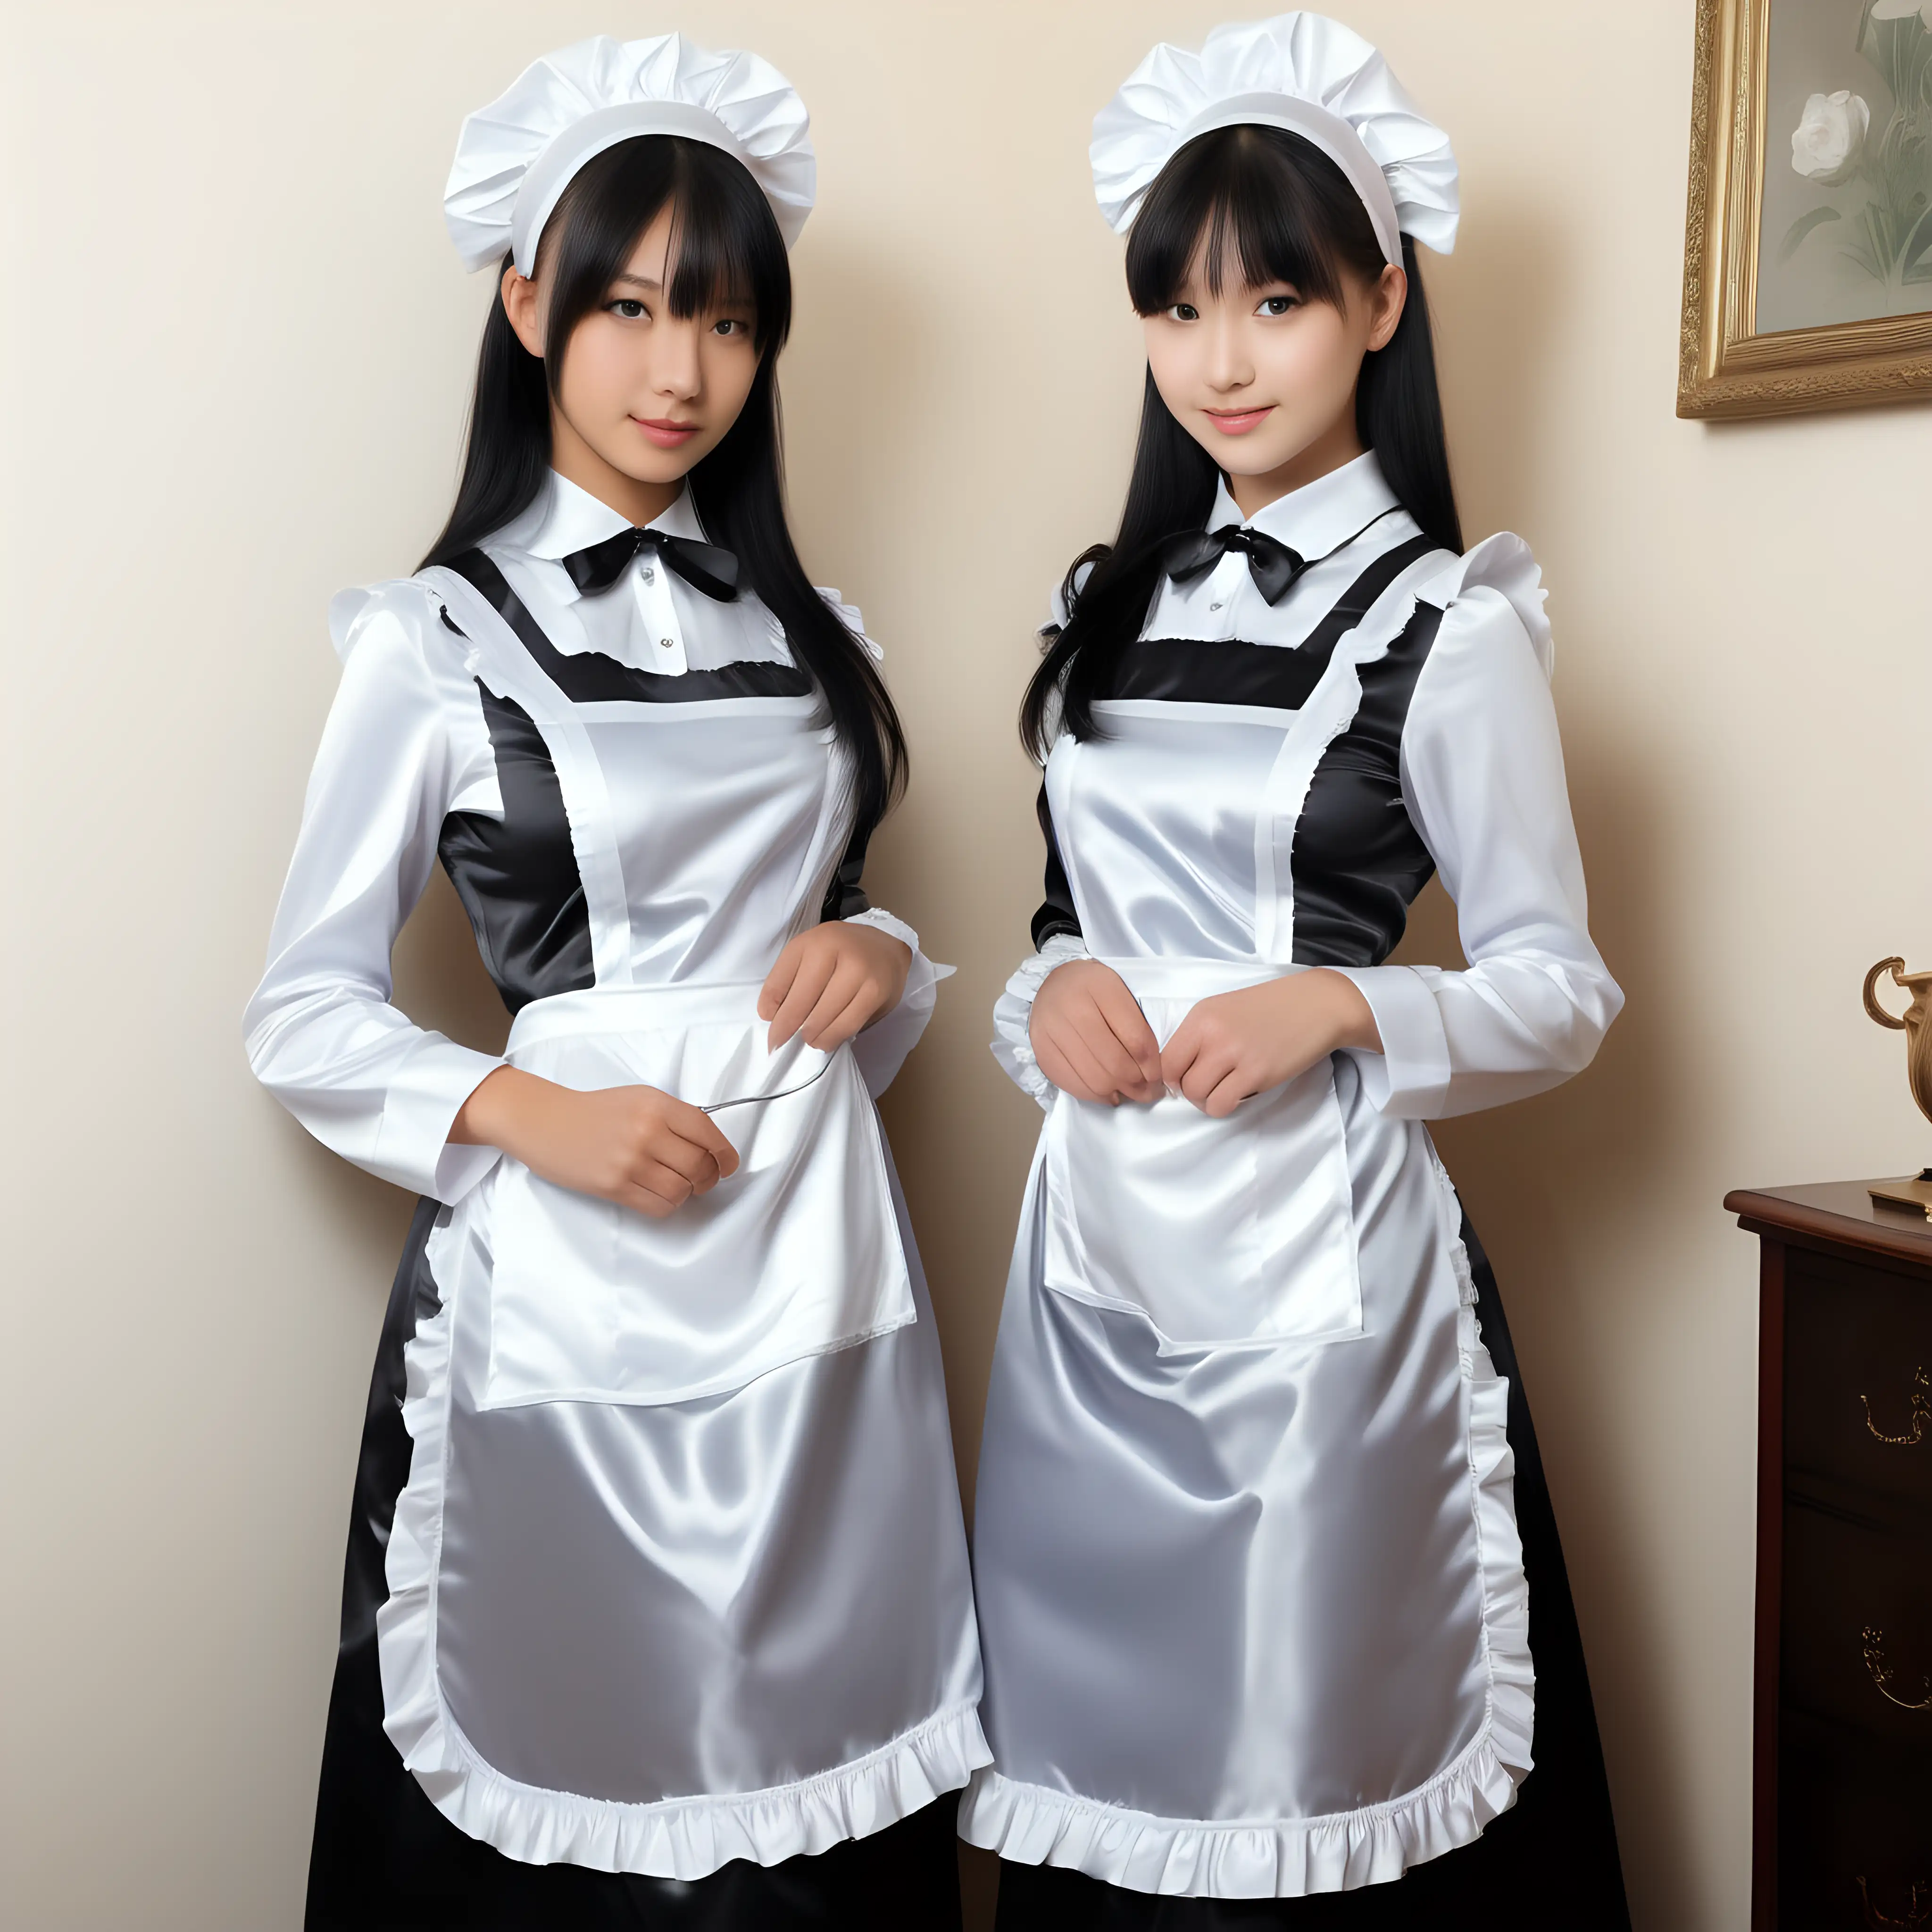 Elegant Satin Maid Uniforms for Girls Graceful Attire in Contemporary Style